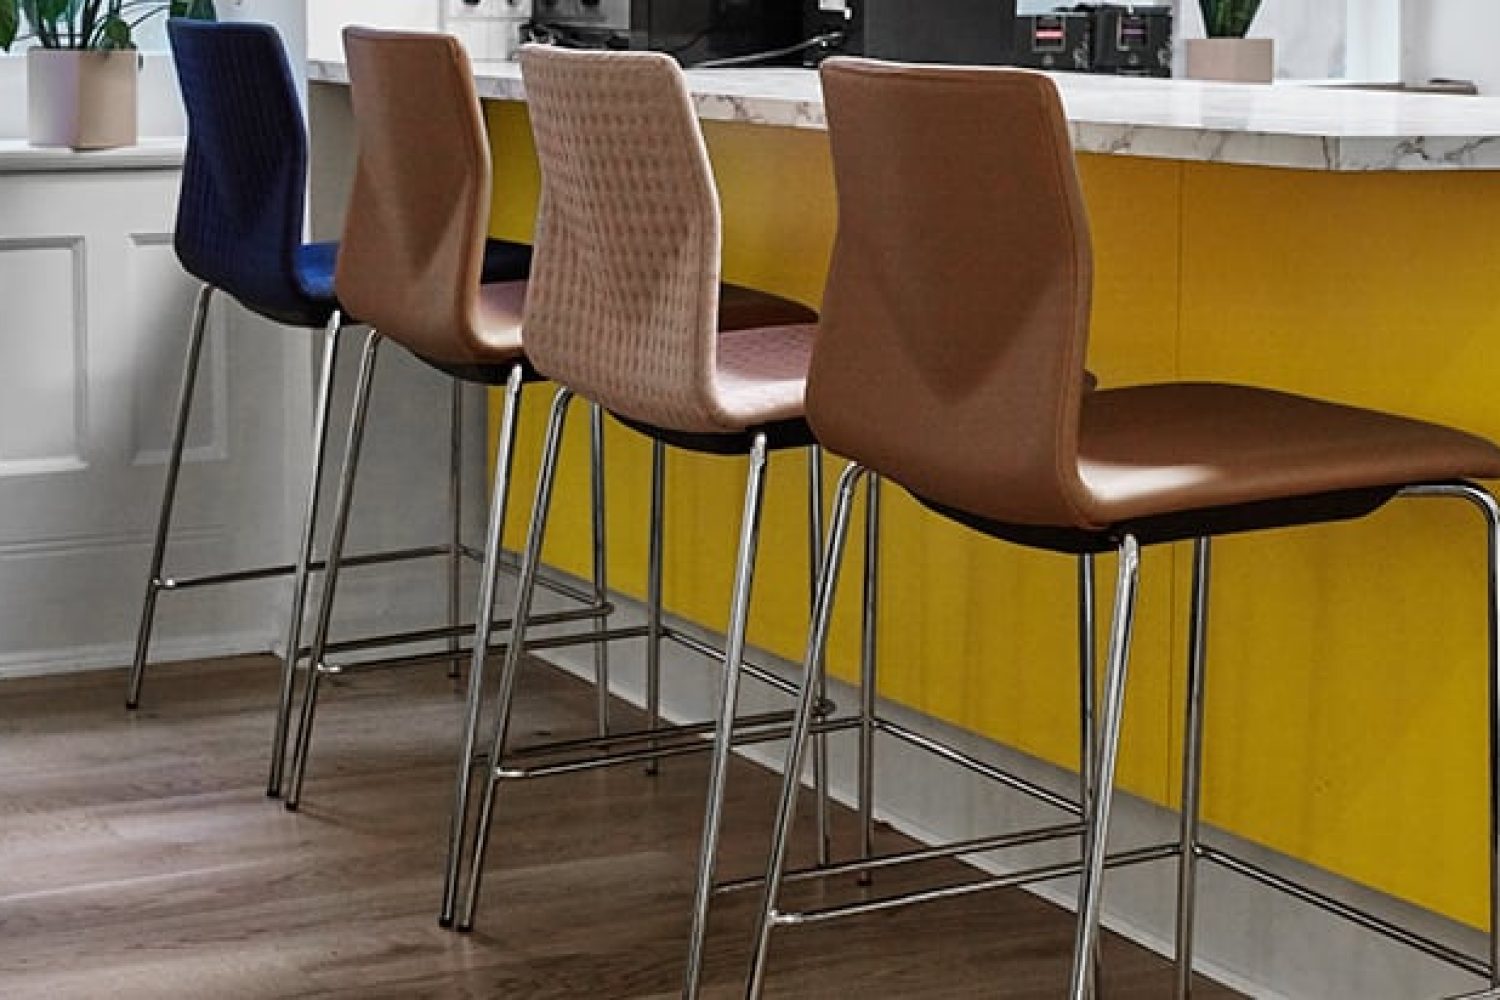 Four counter chairs in a kitchen with yellow walls.